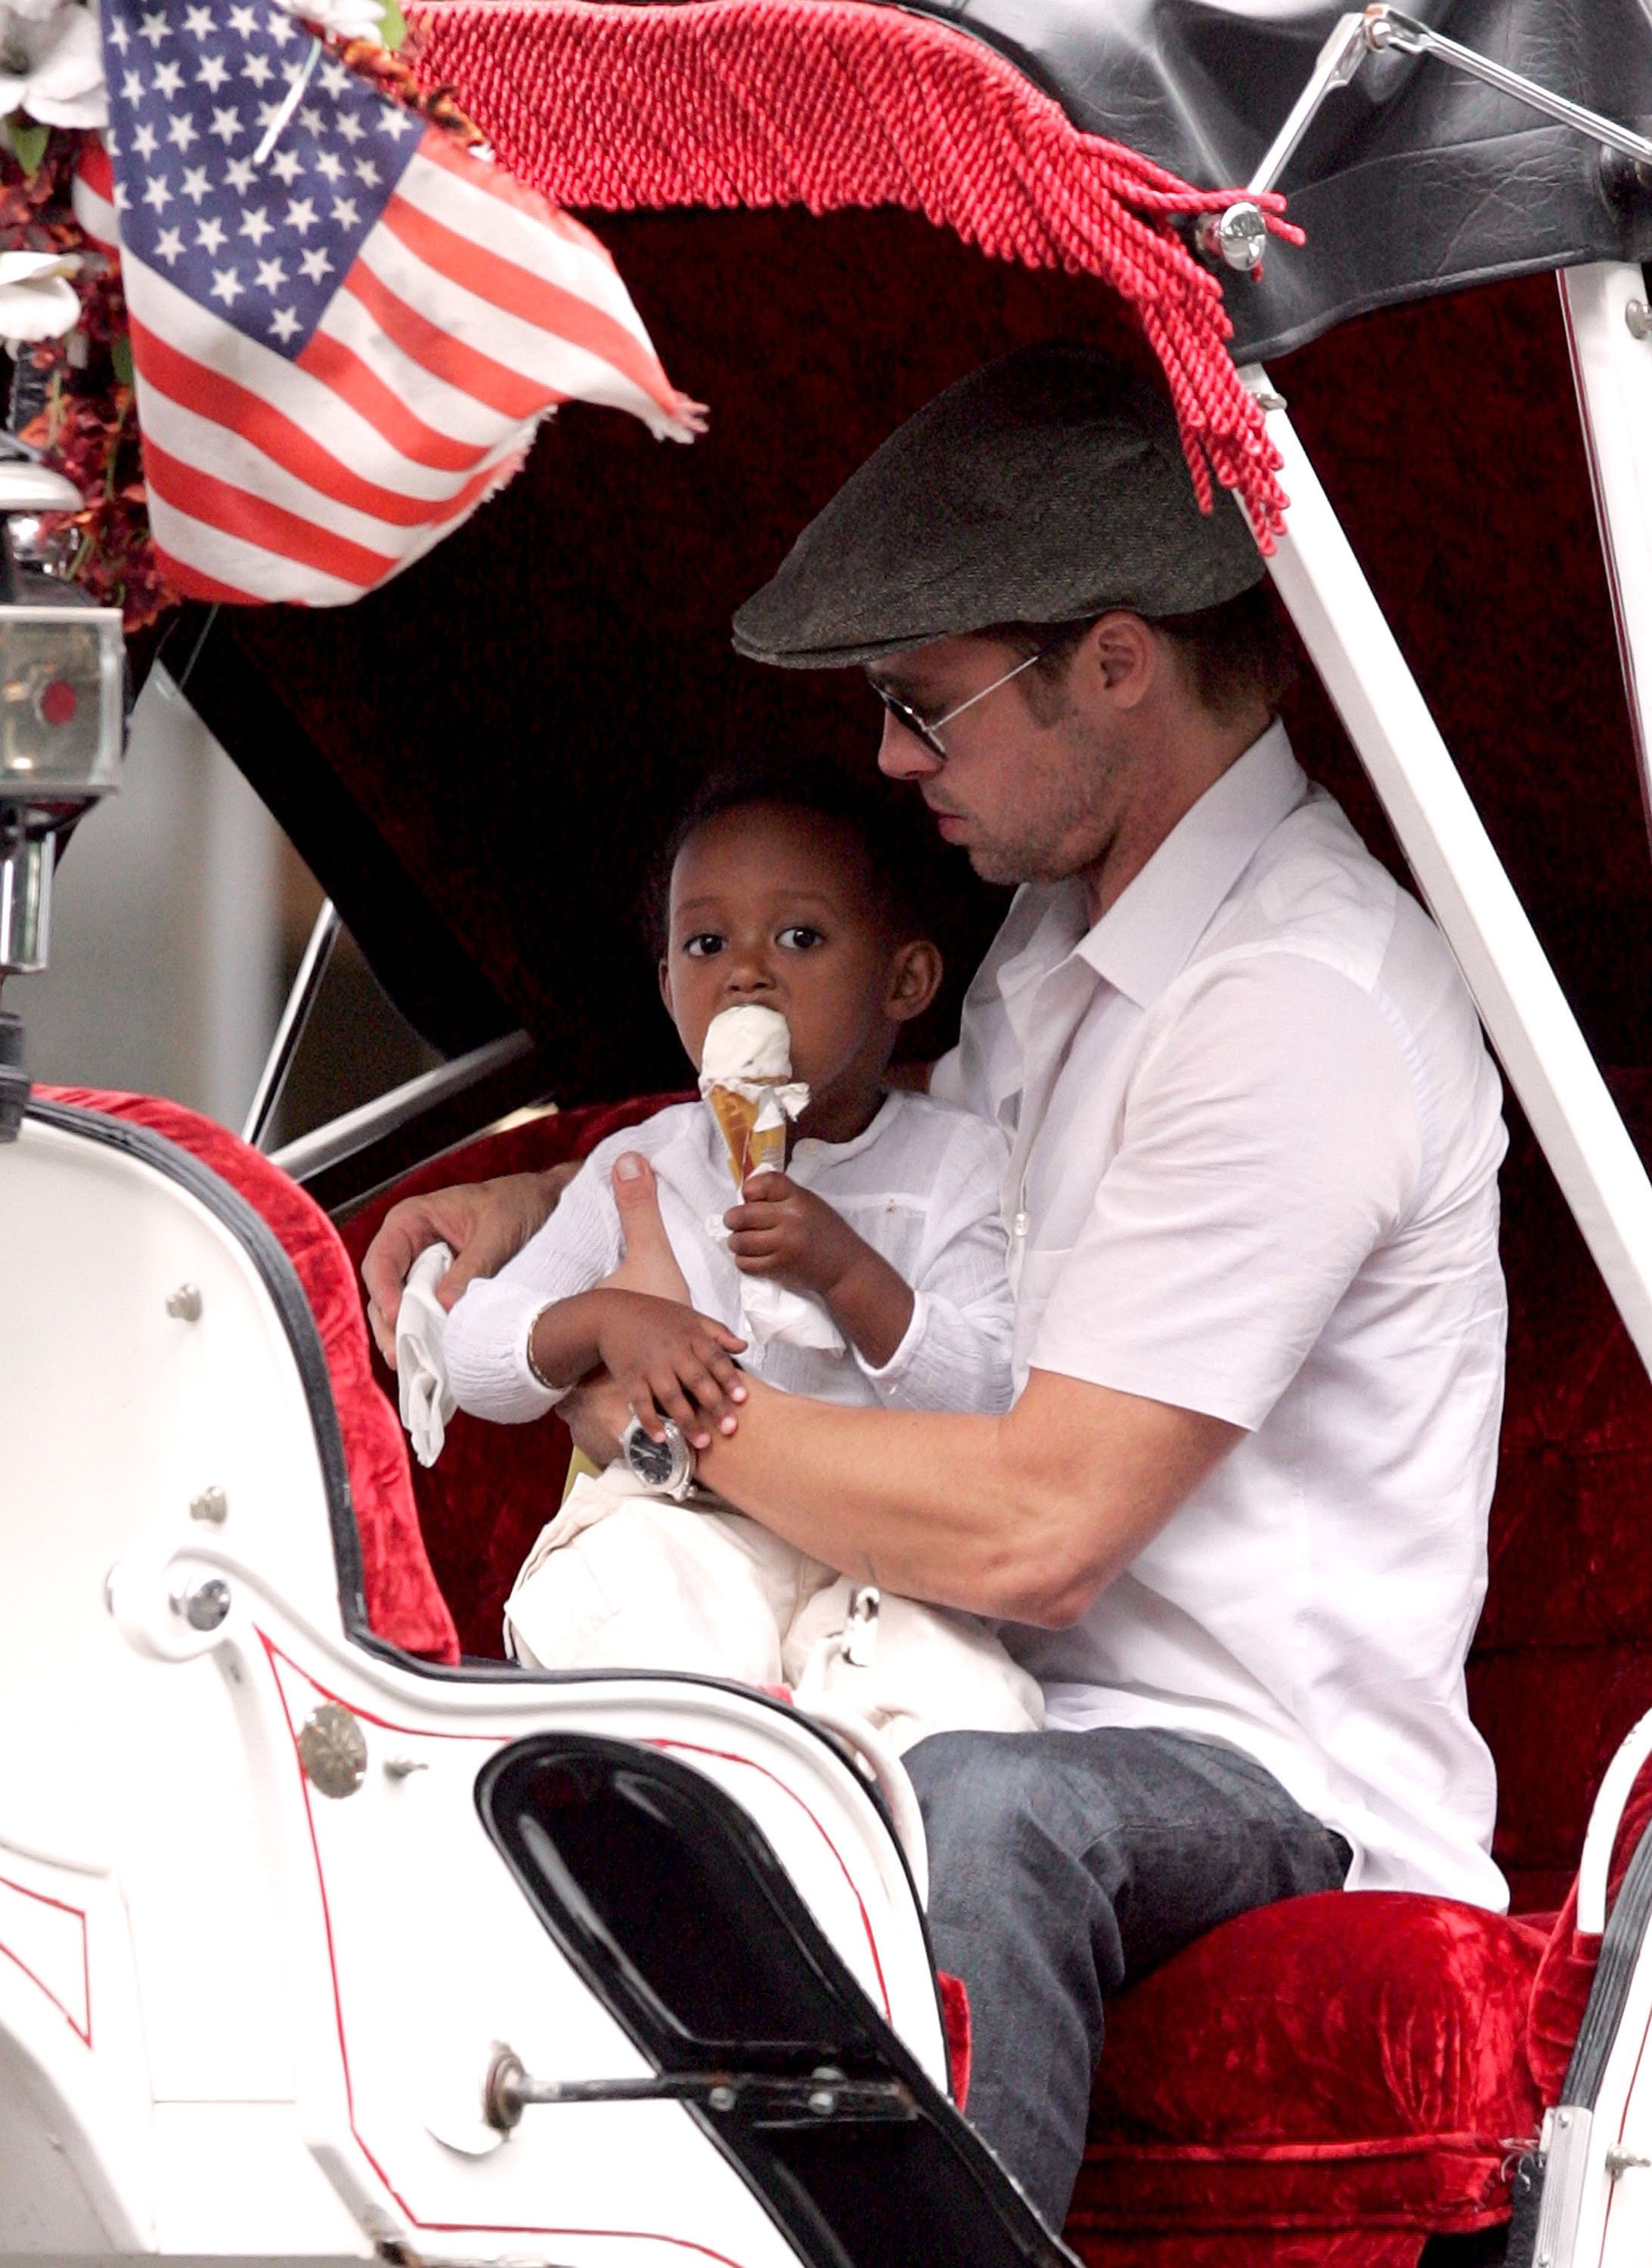 Brad Pitt and Zahara Jolie-Pitt visit Central Park in New York City on August 28, 2007. | Source: Getty Images